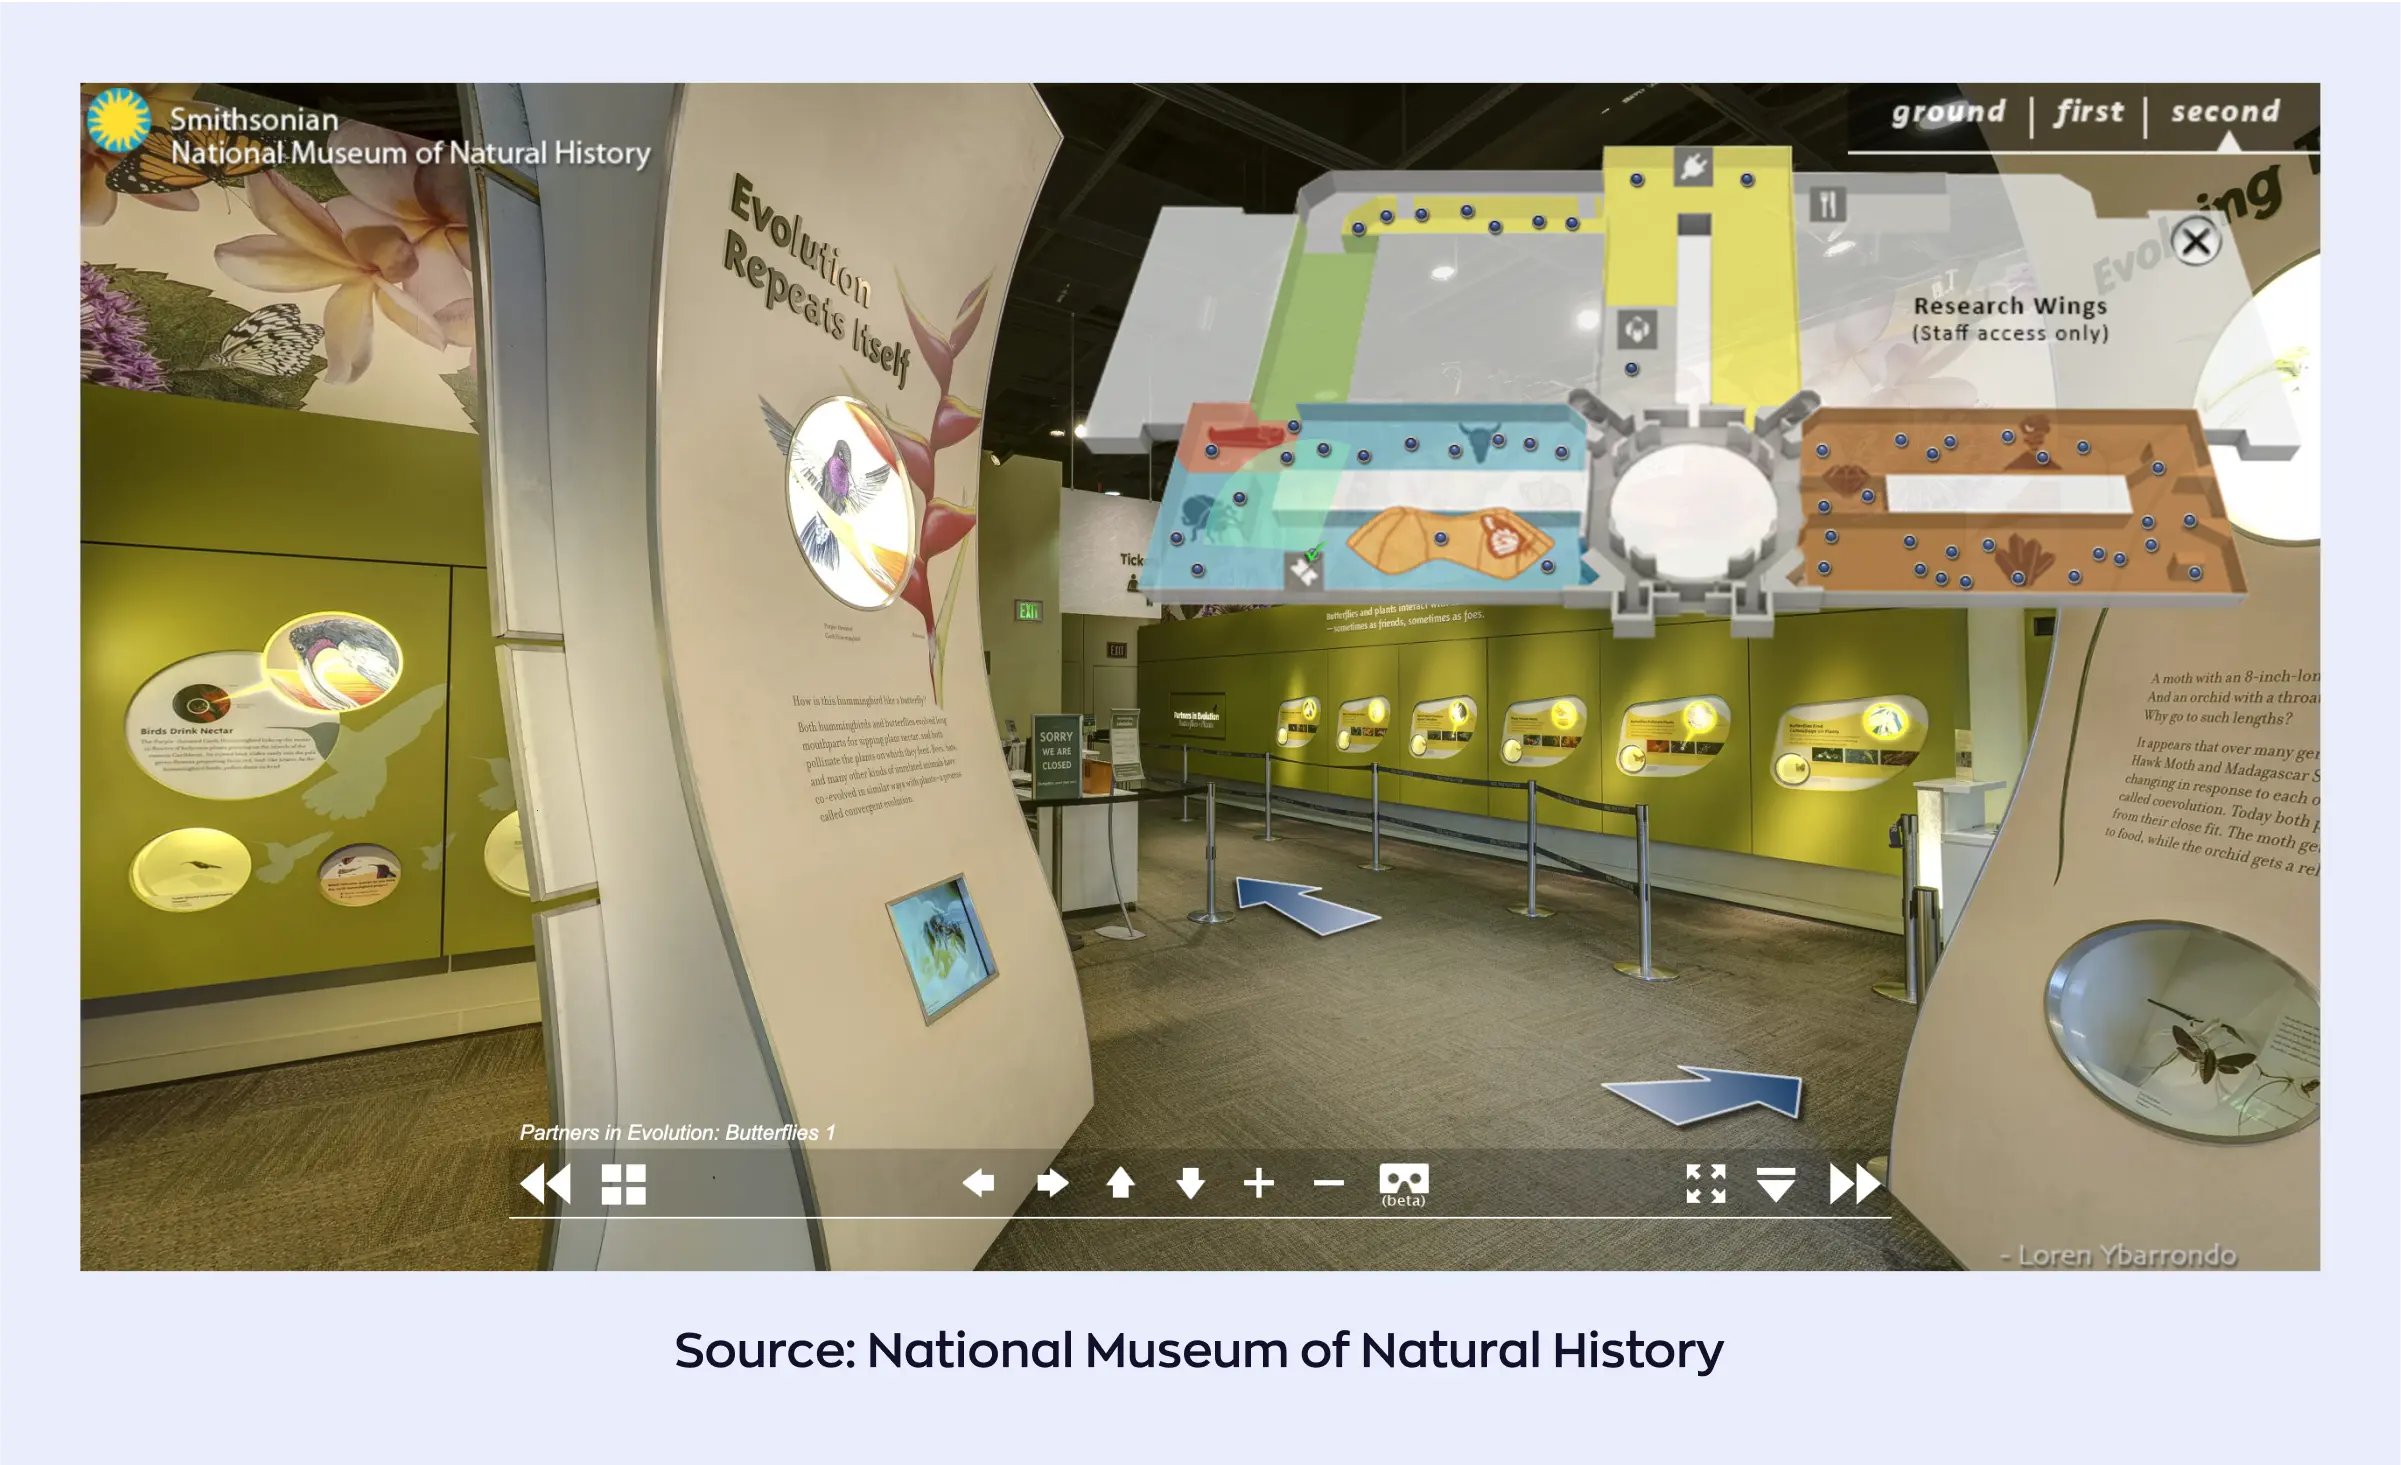 Travel software development: Vitrual tour from the National Museum of Natural History